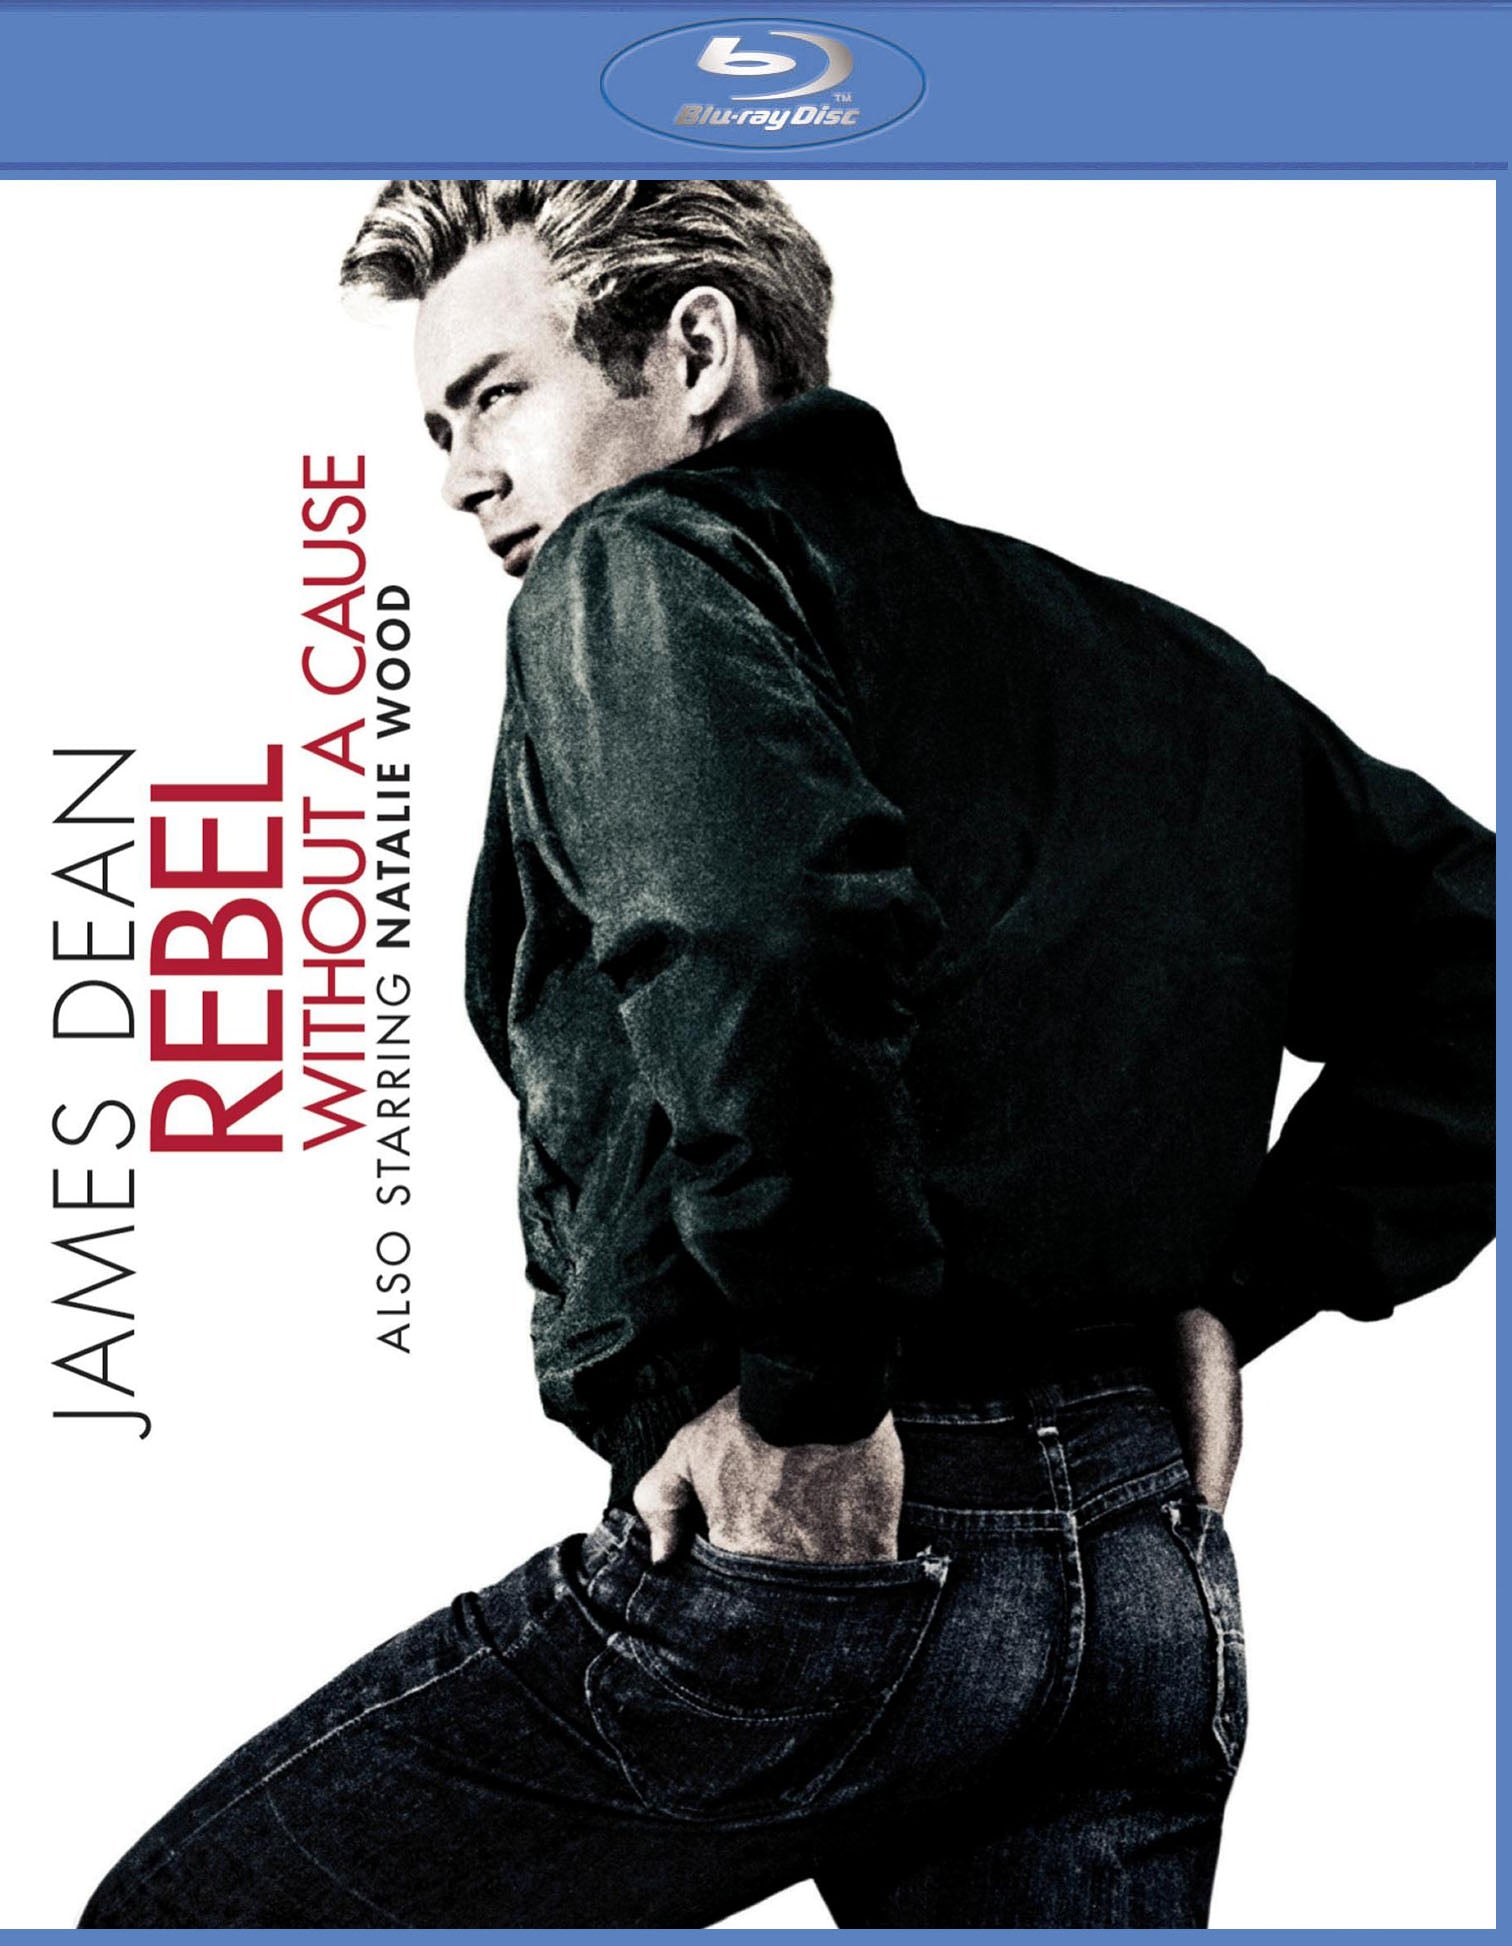 Rebel Without a Cause [Blu-ray] cover art